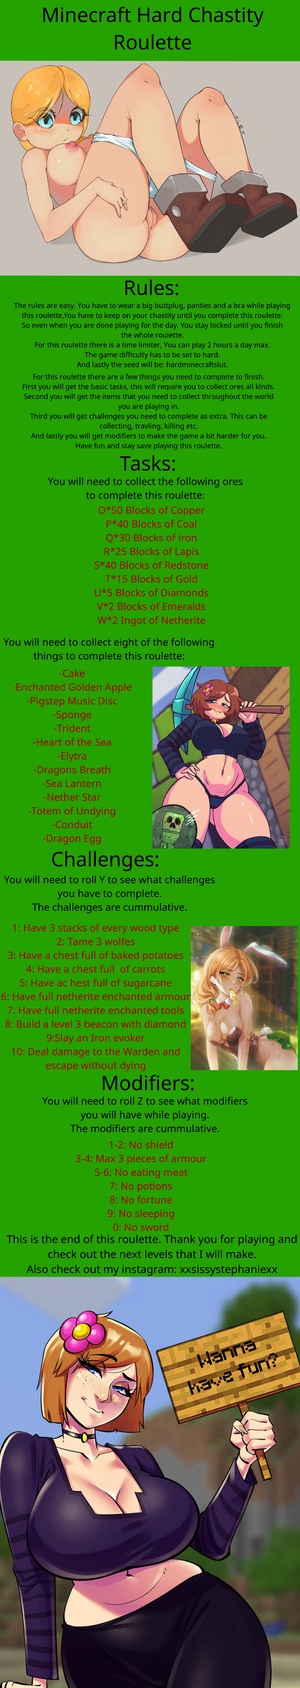 Minecraft Hard Chastity Roulette